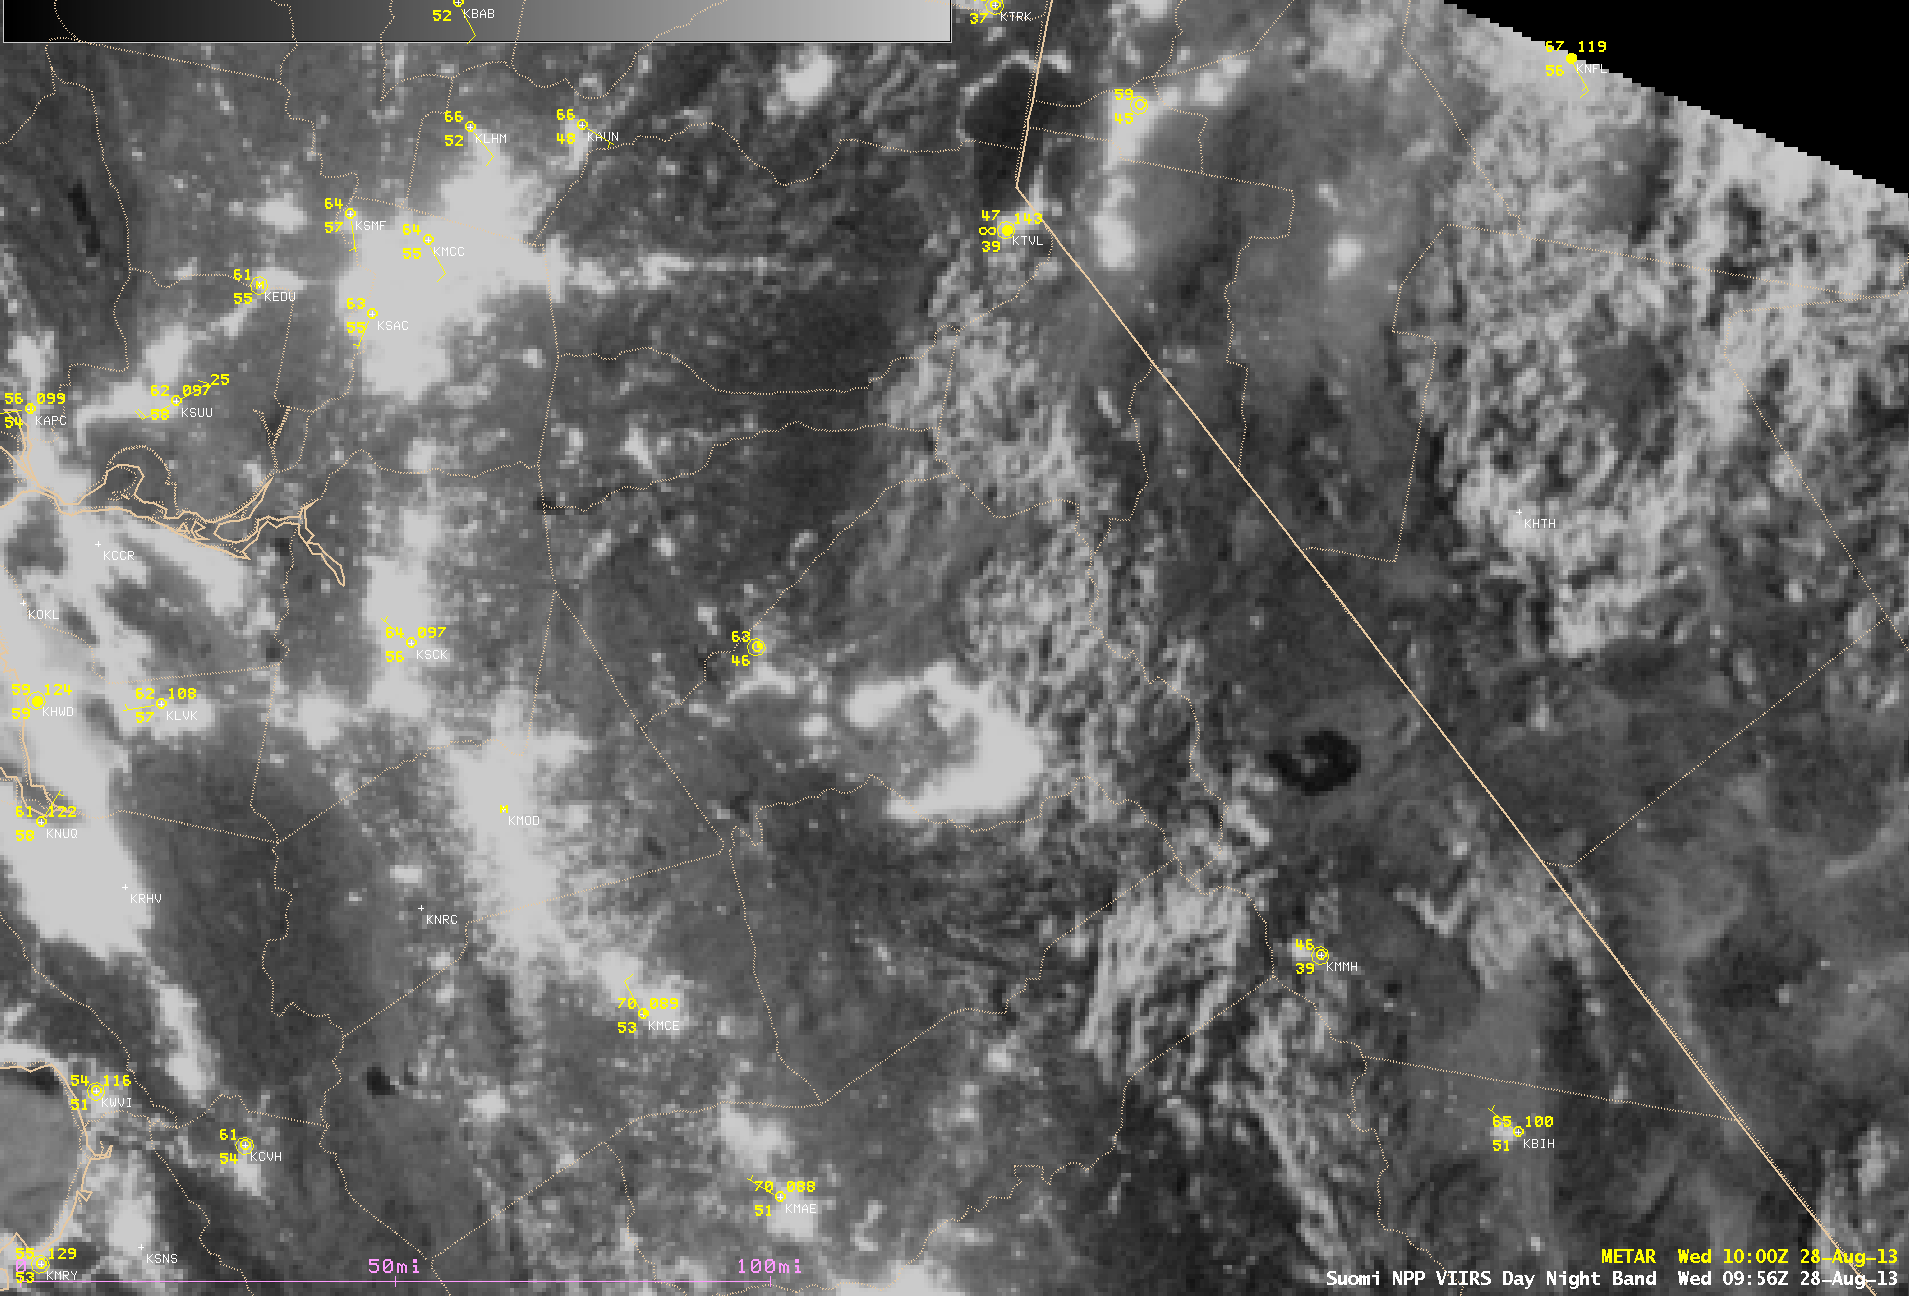 Suomi NPP VIIRS 0.7 Âµm Day/Night Band and 3.74 Âµm shortwave IR images (28 August)